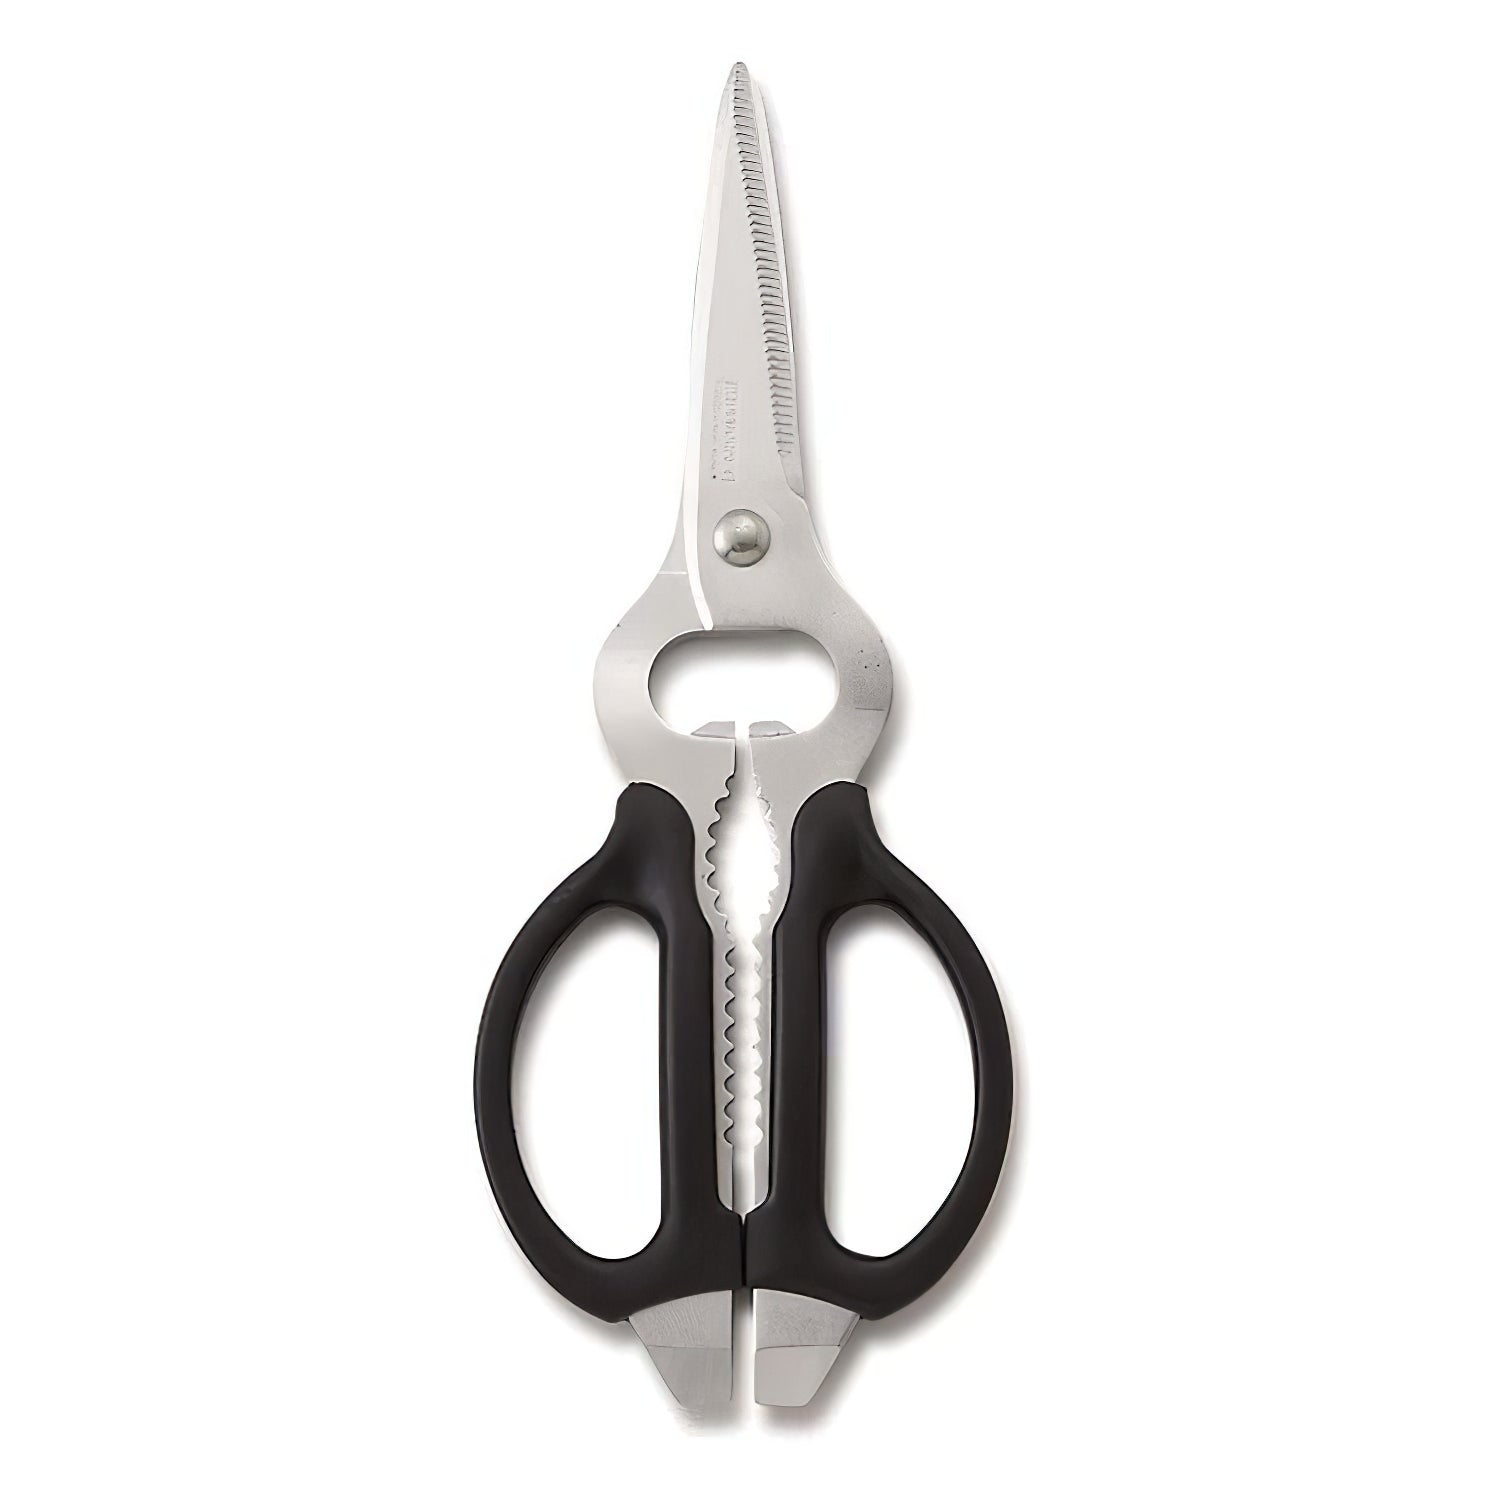 MIMATSU Kitchen Scissors Removable Hand Made 152g - Made in Japan